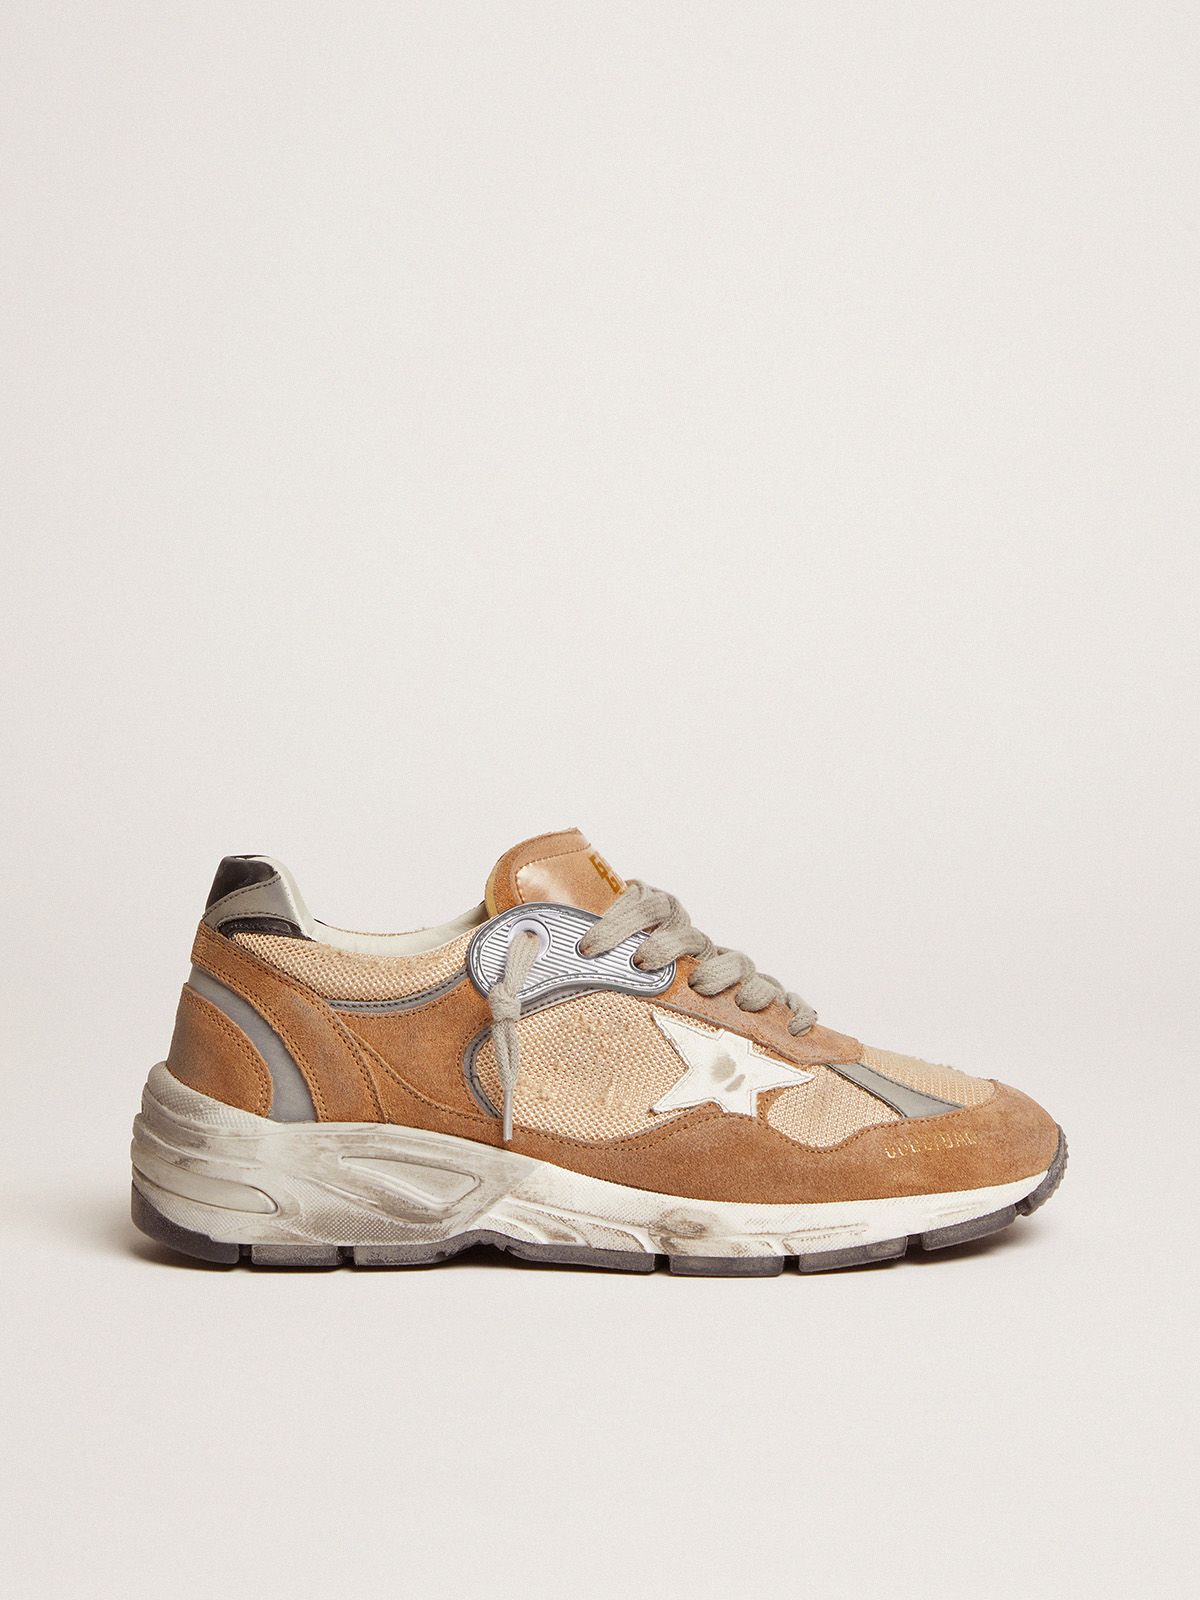 Golden Goose Outlet Dad-Star sneakers in tobacco-colored mesh and suede with white leather star and black leather heel tab